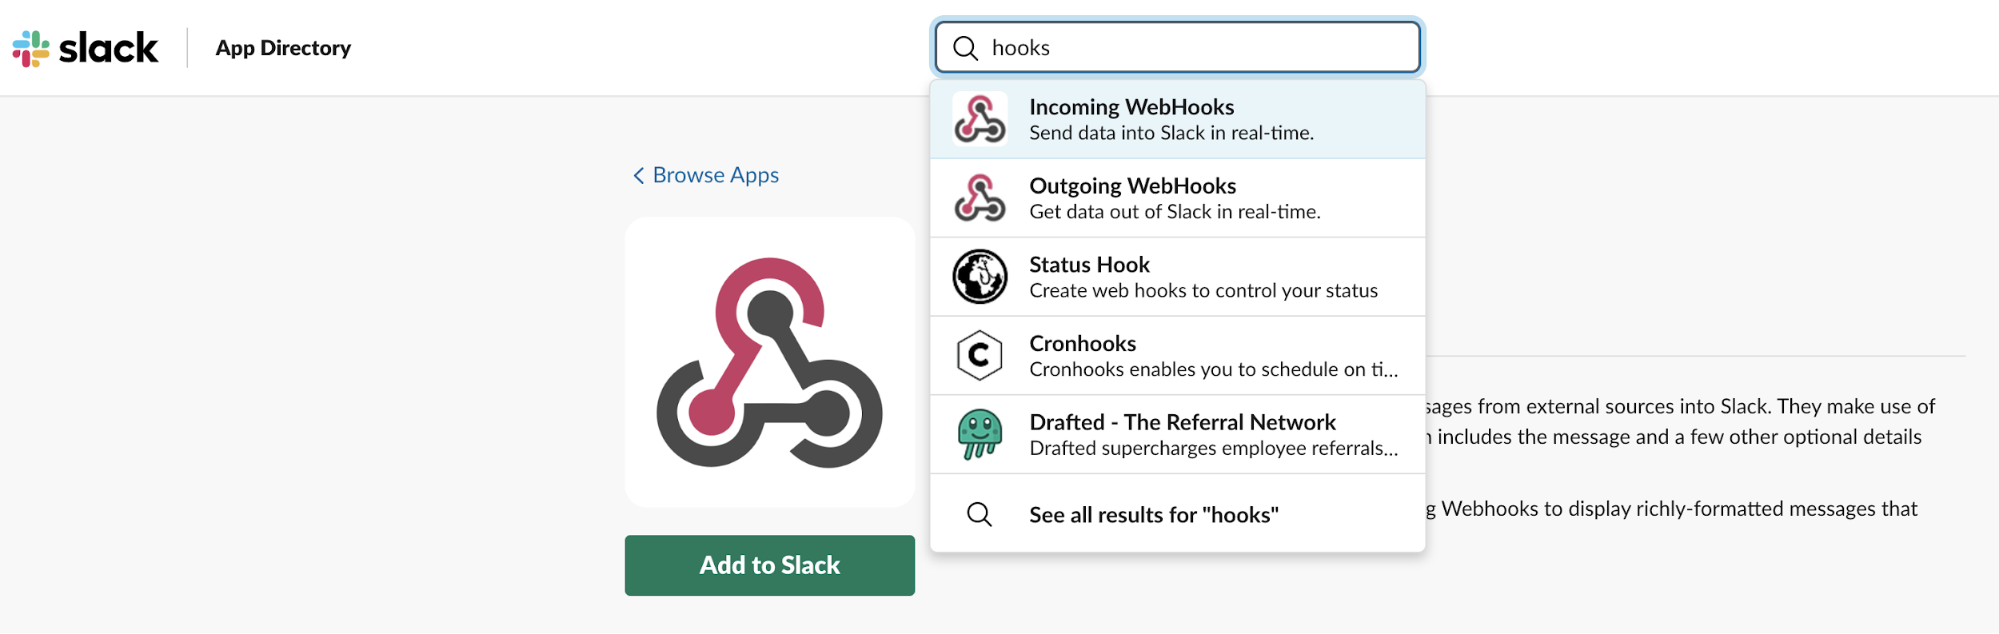 Add 'Incoming Webhooks' to your Slack workspace